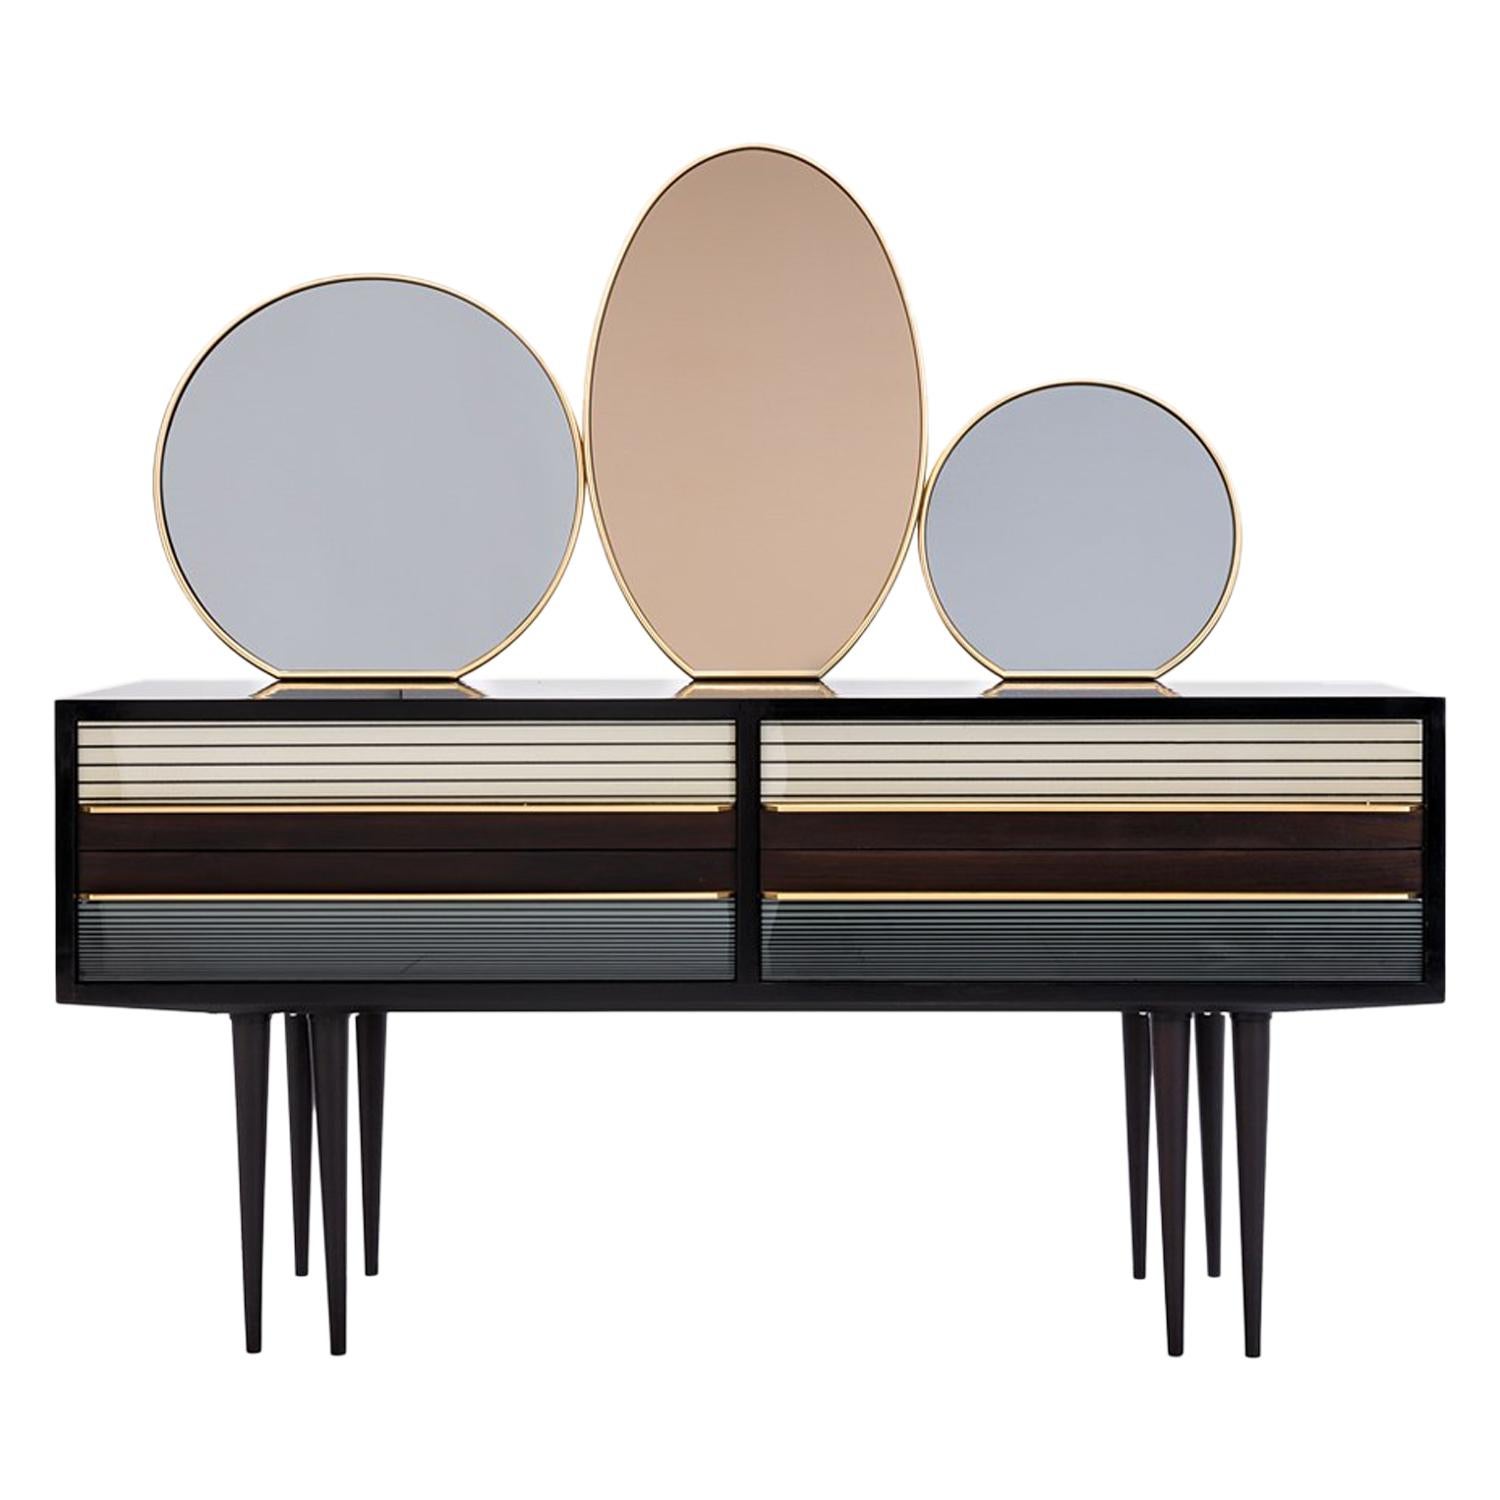 Baxter Buffet No. 2 in Rosewood with Tinted Mirrors, circa 1950 by Draga & Aurel